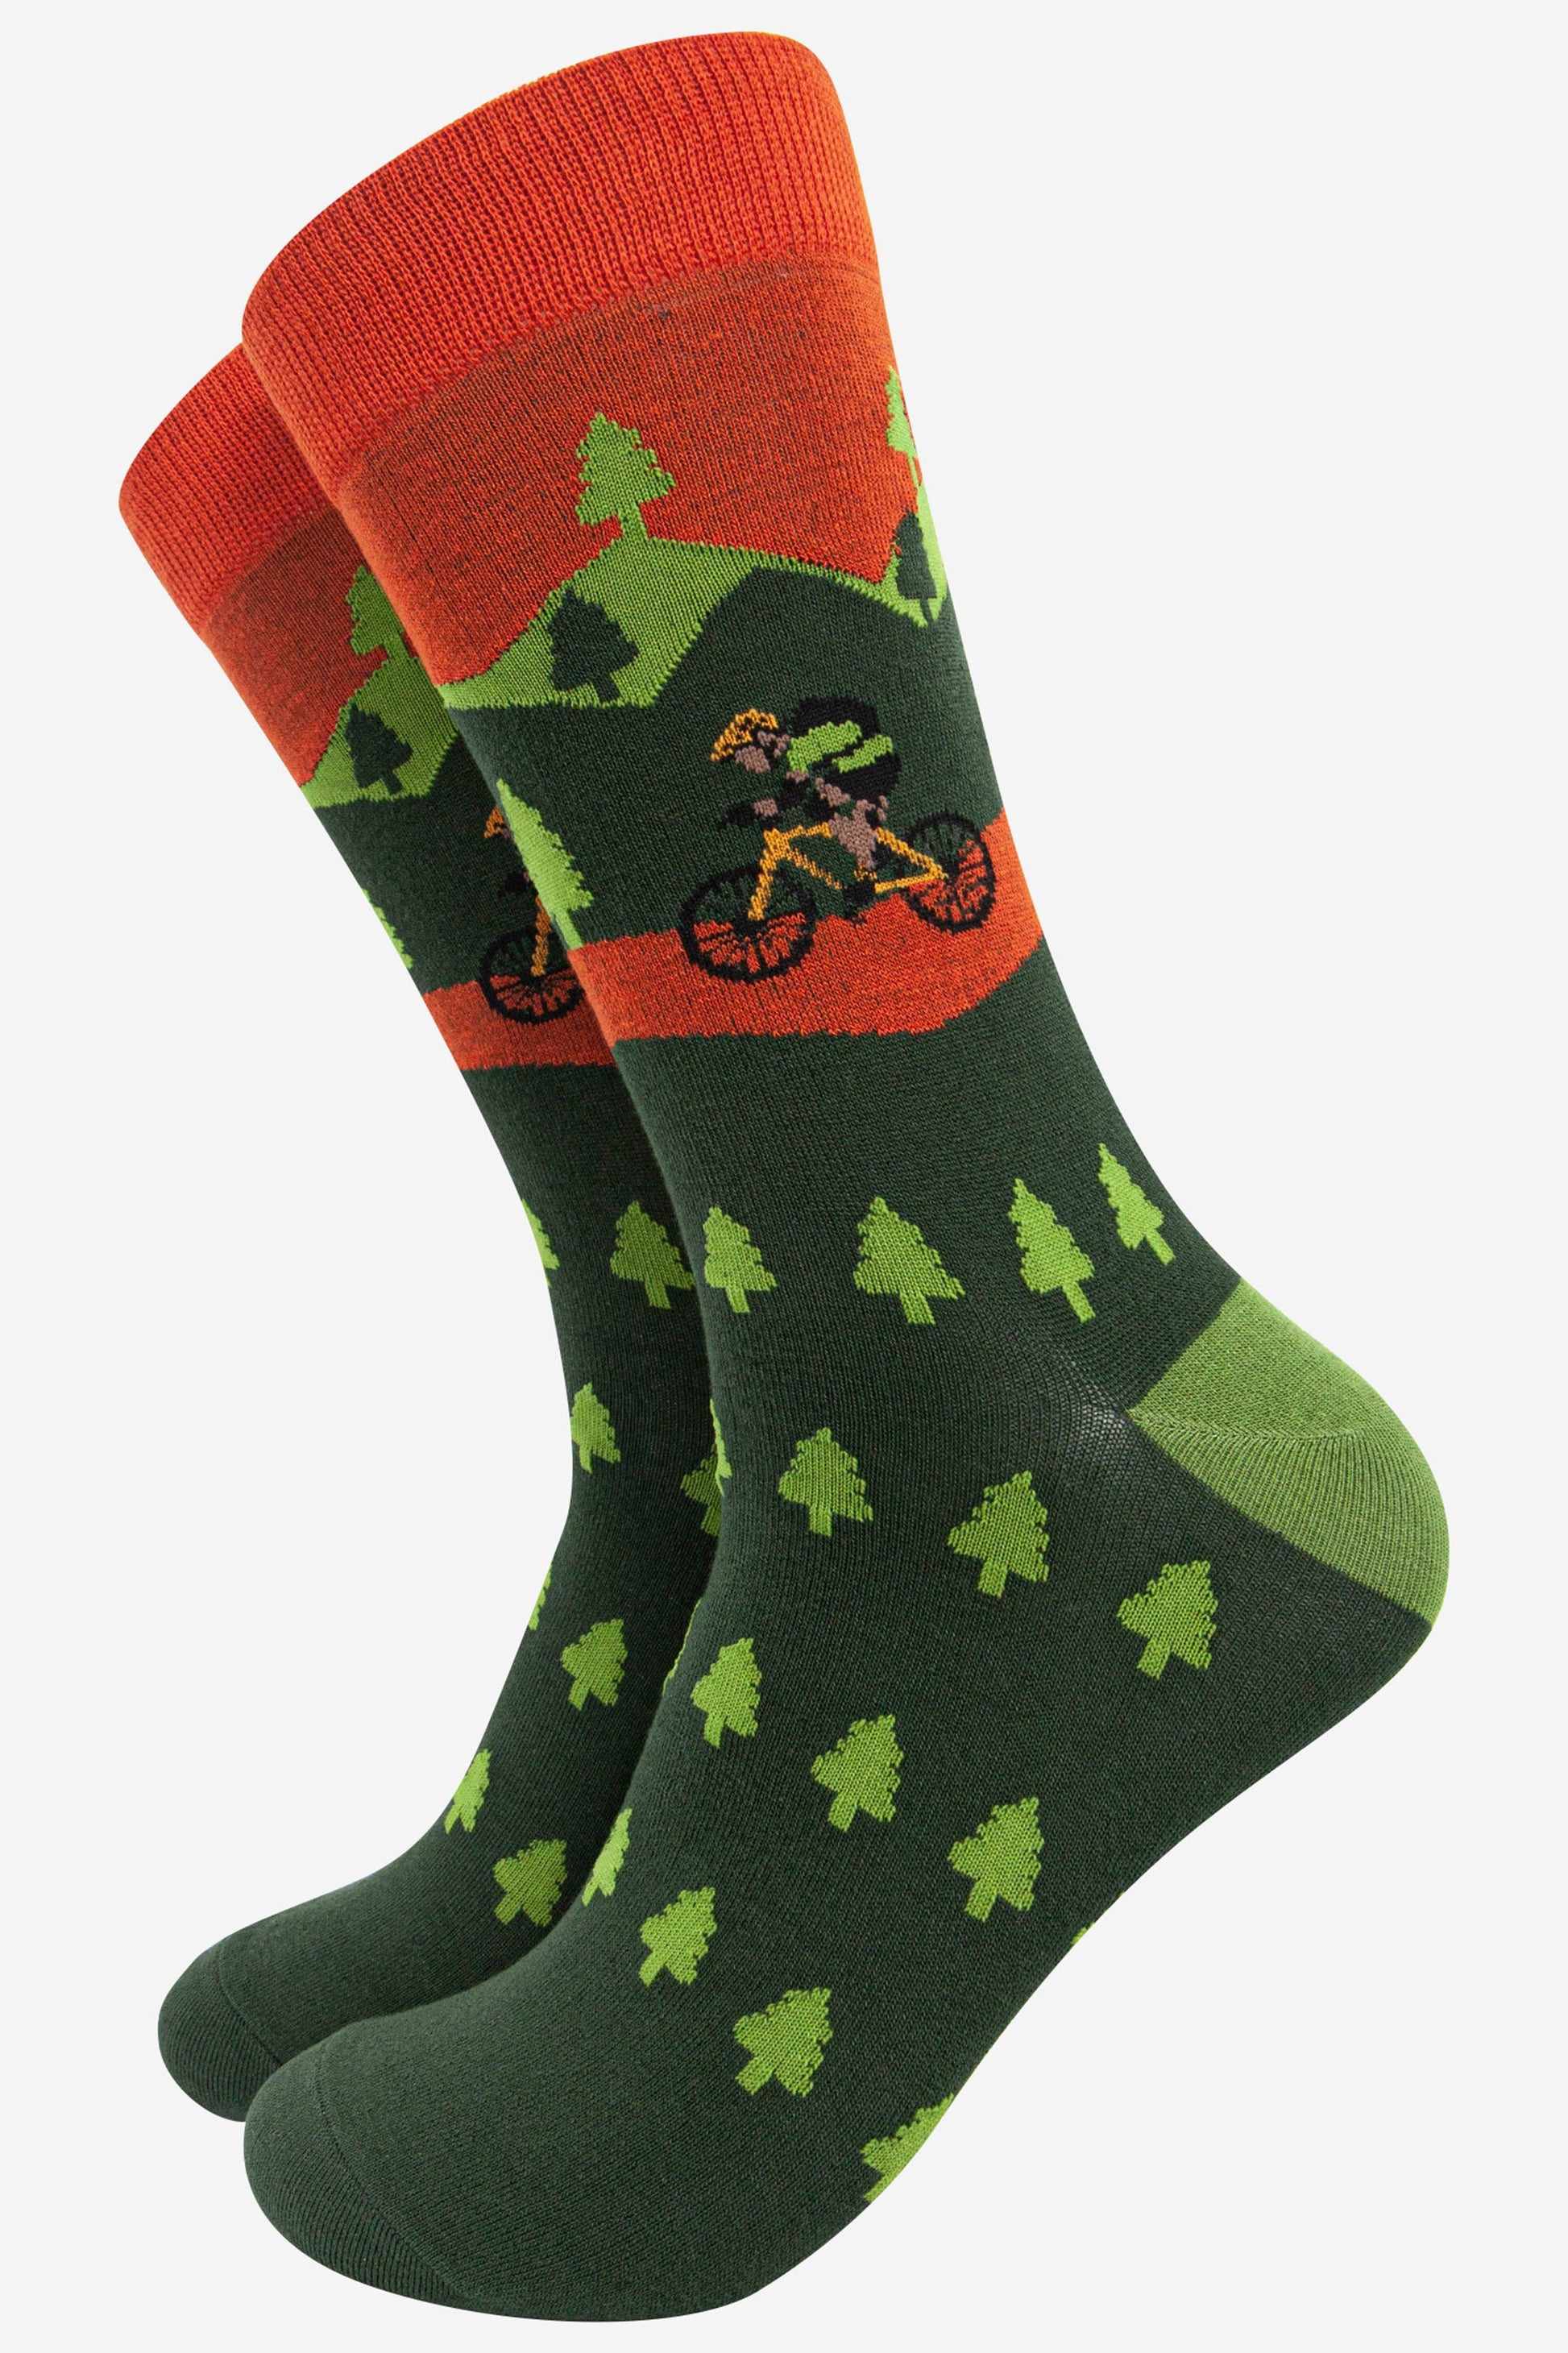 green and orange bamboo socks featuring a forest of trees and a person on a mountain bike